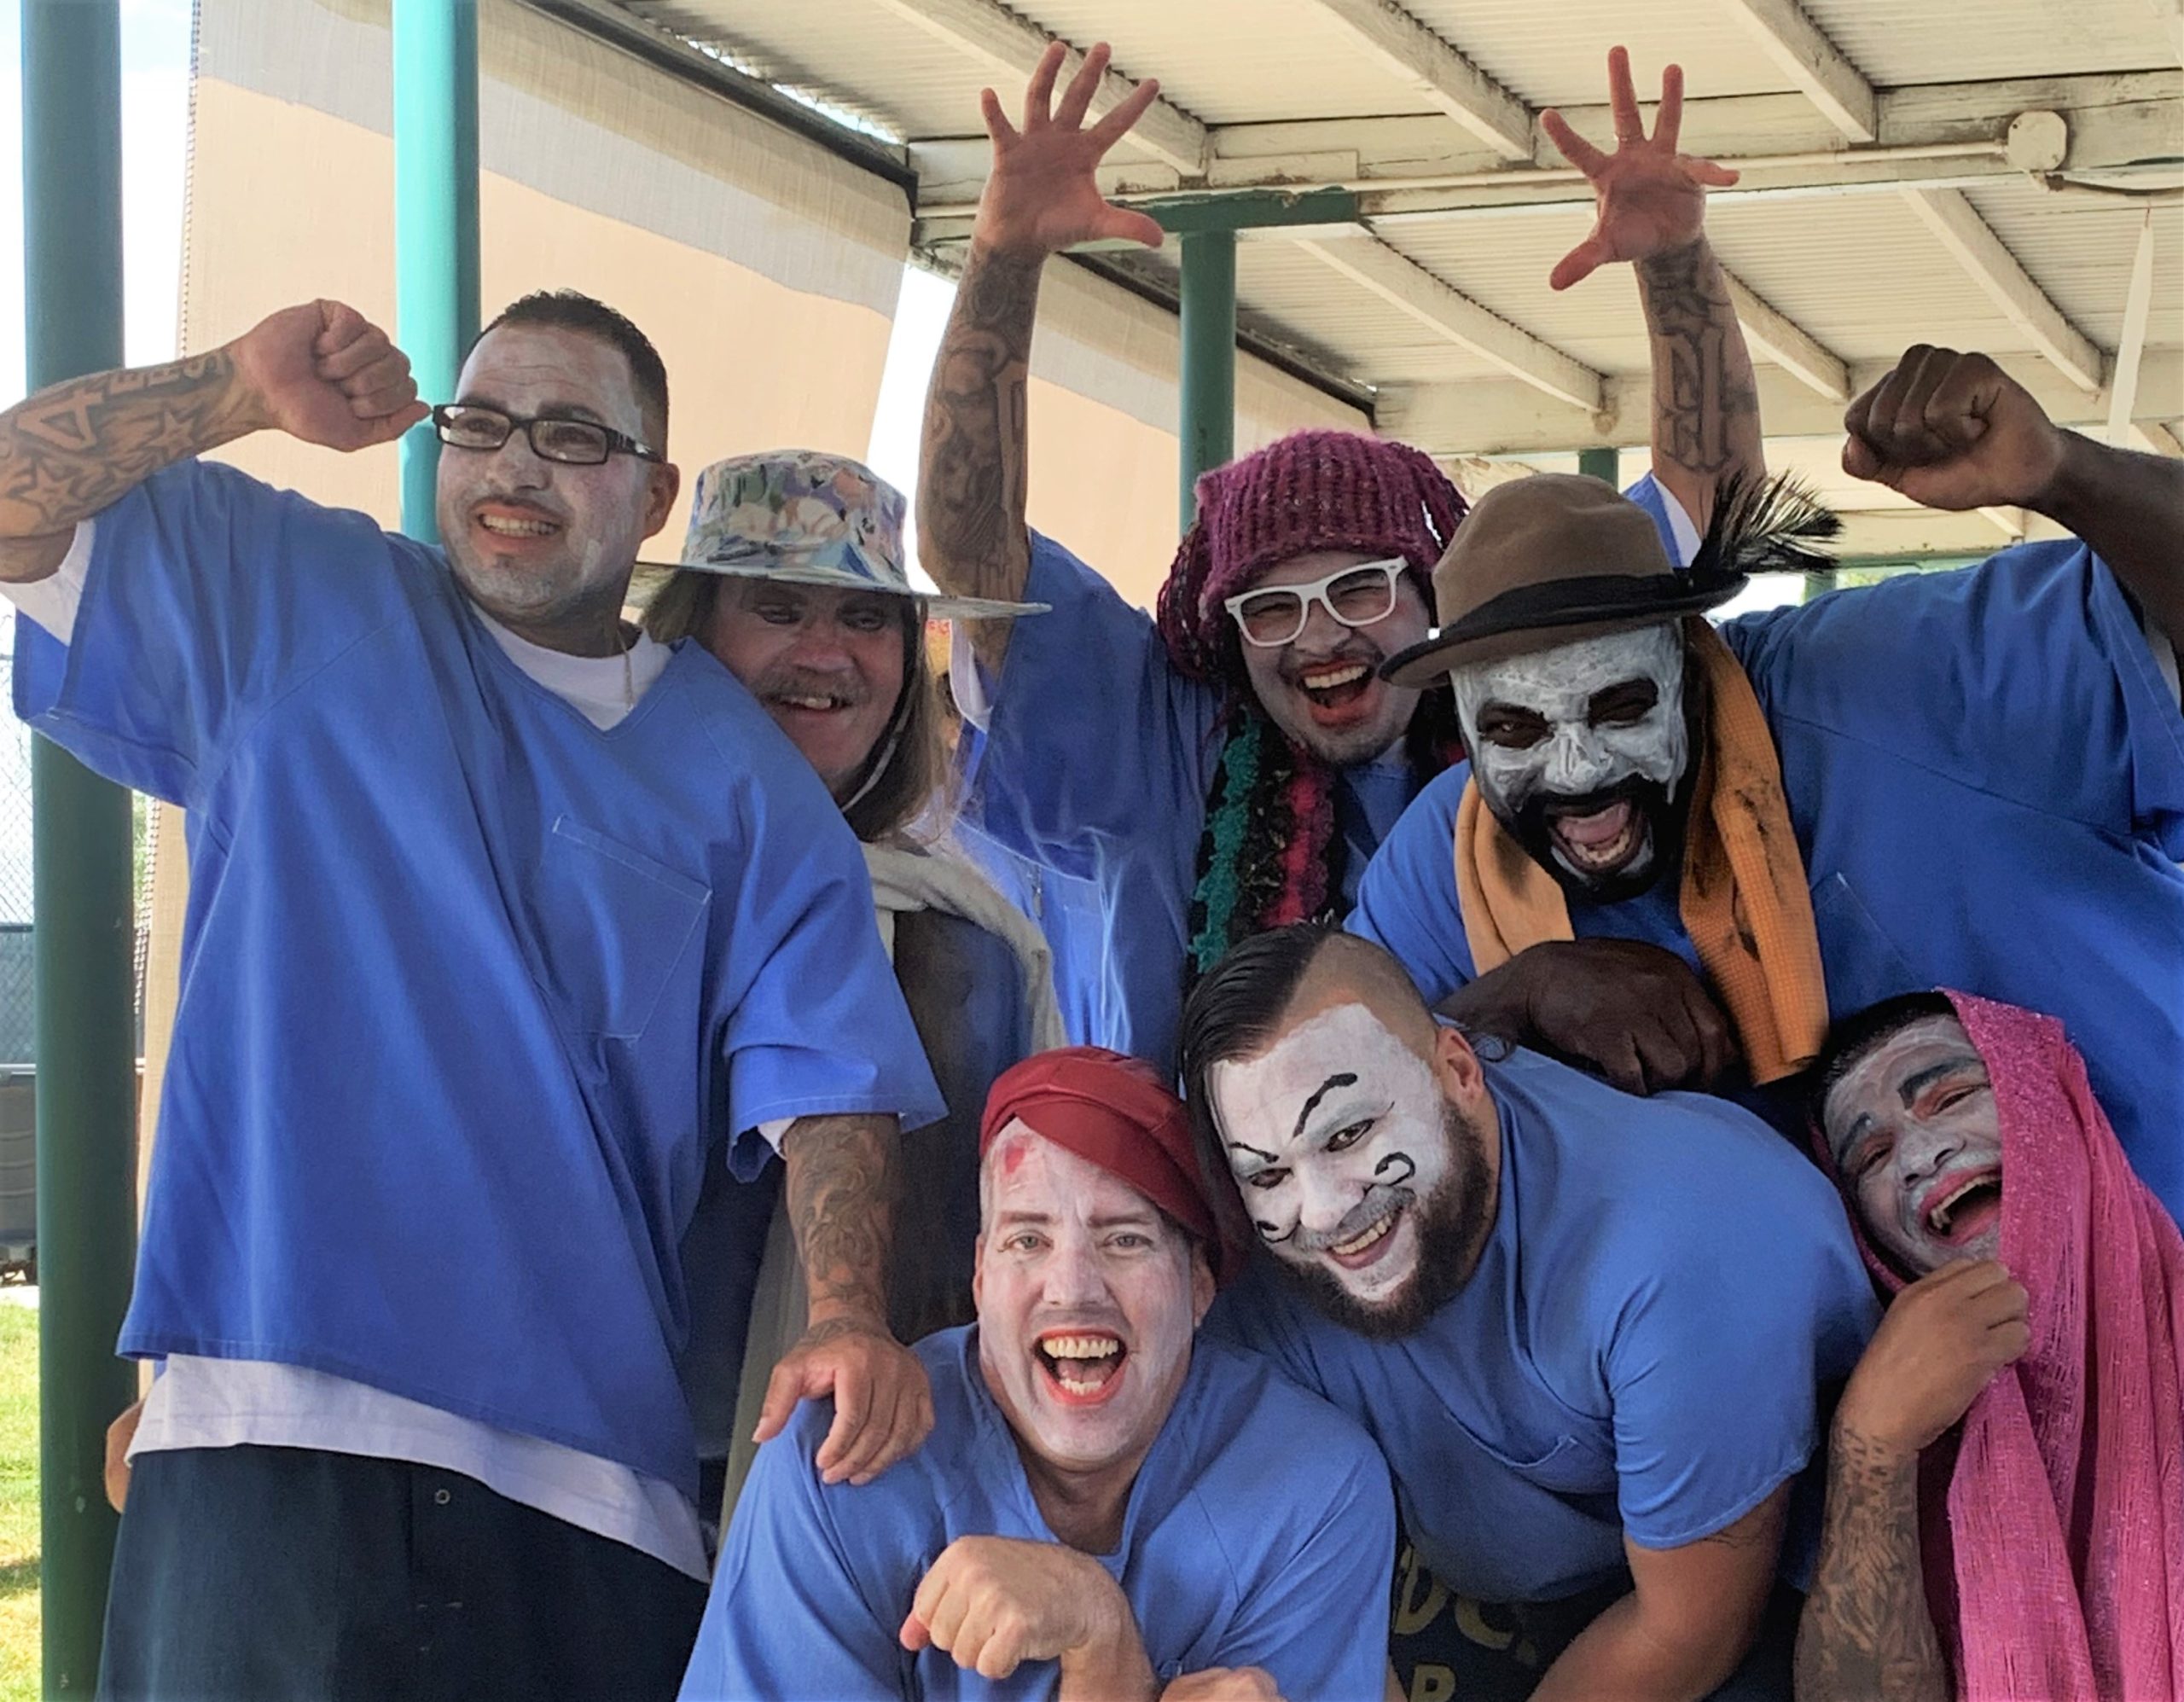 The Actors' Gang Prison Project at CIM with incarcerated actors wearing makeup and displaying emotions.